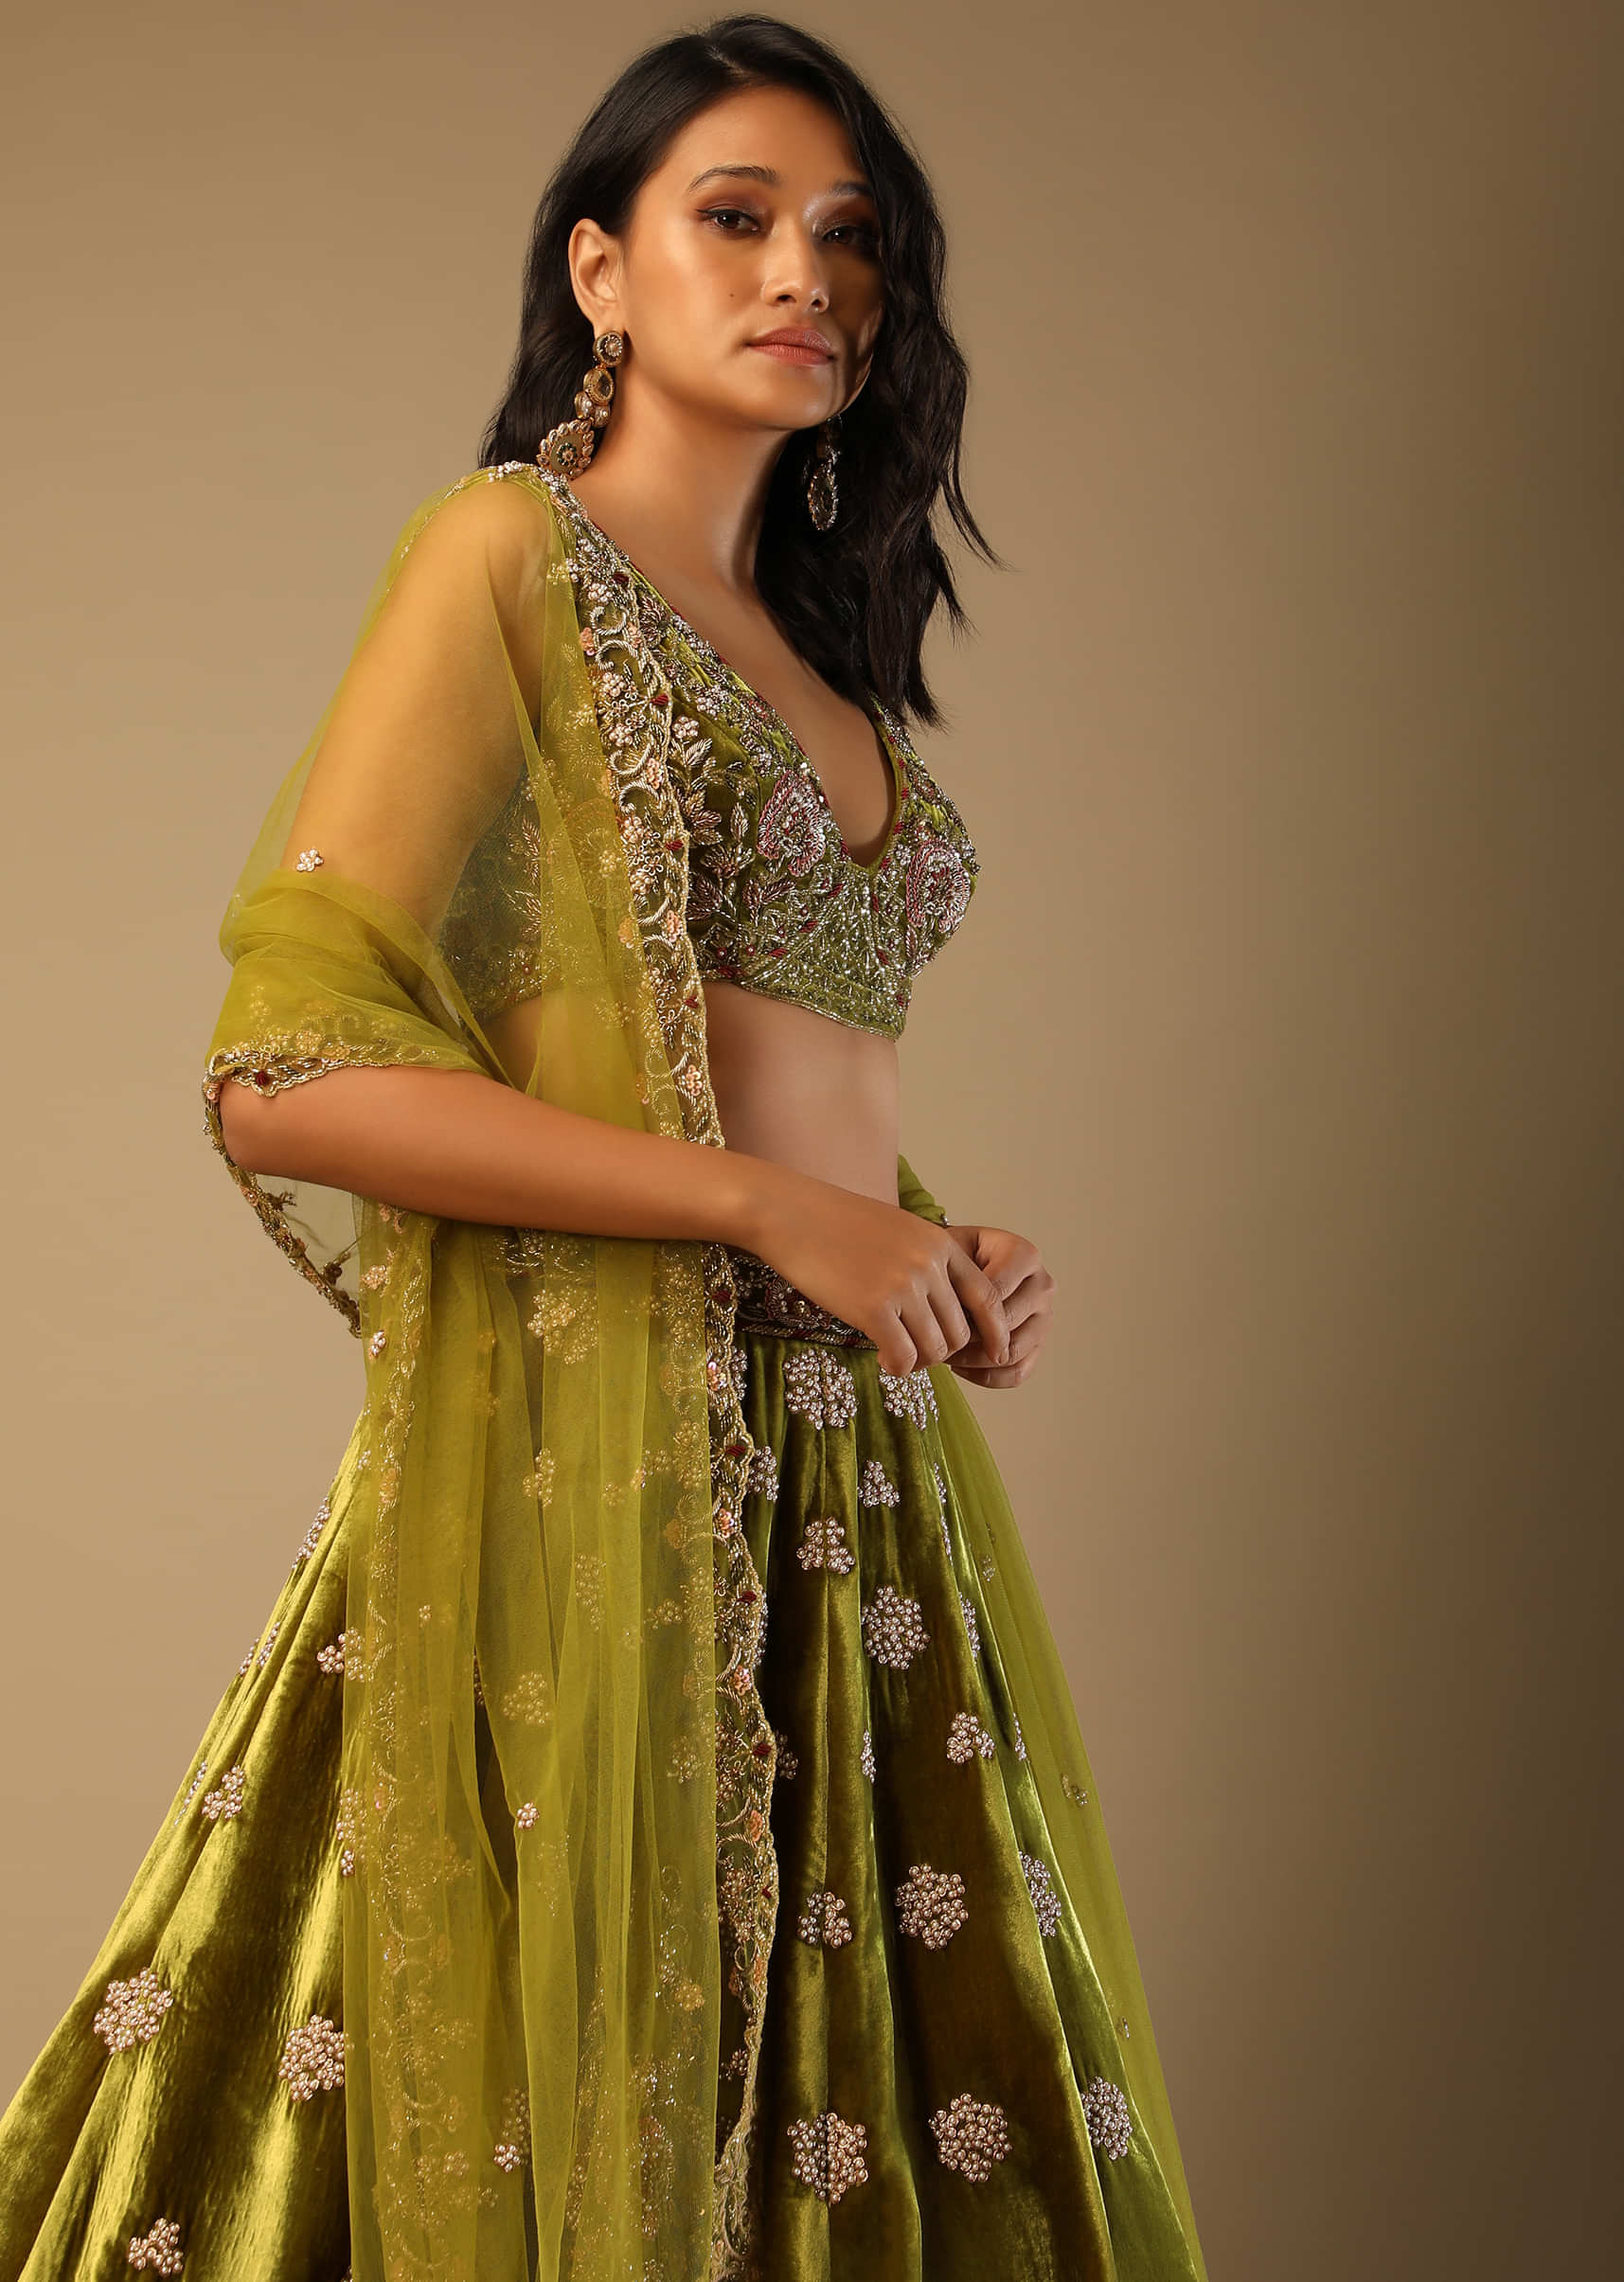 Moss Green Lehenga Choli With Multi Colored Hand Embroidered Floral Buttis 